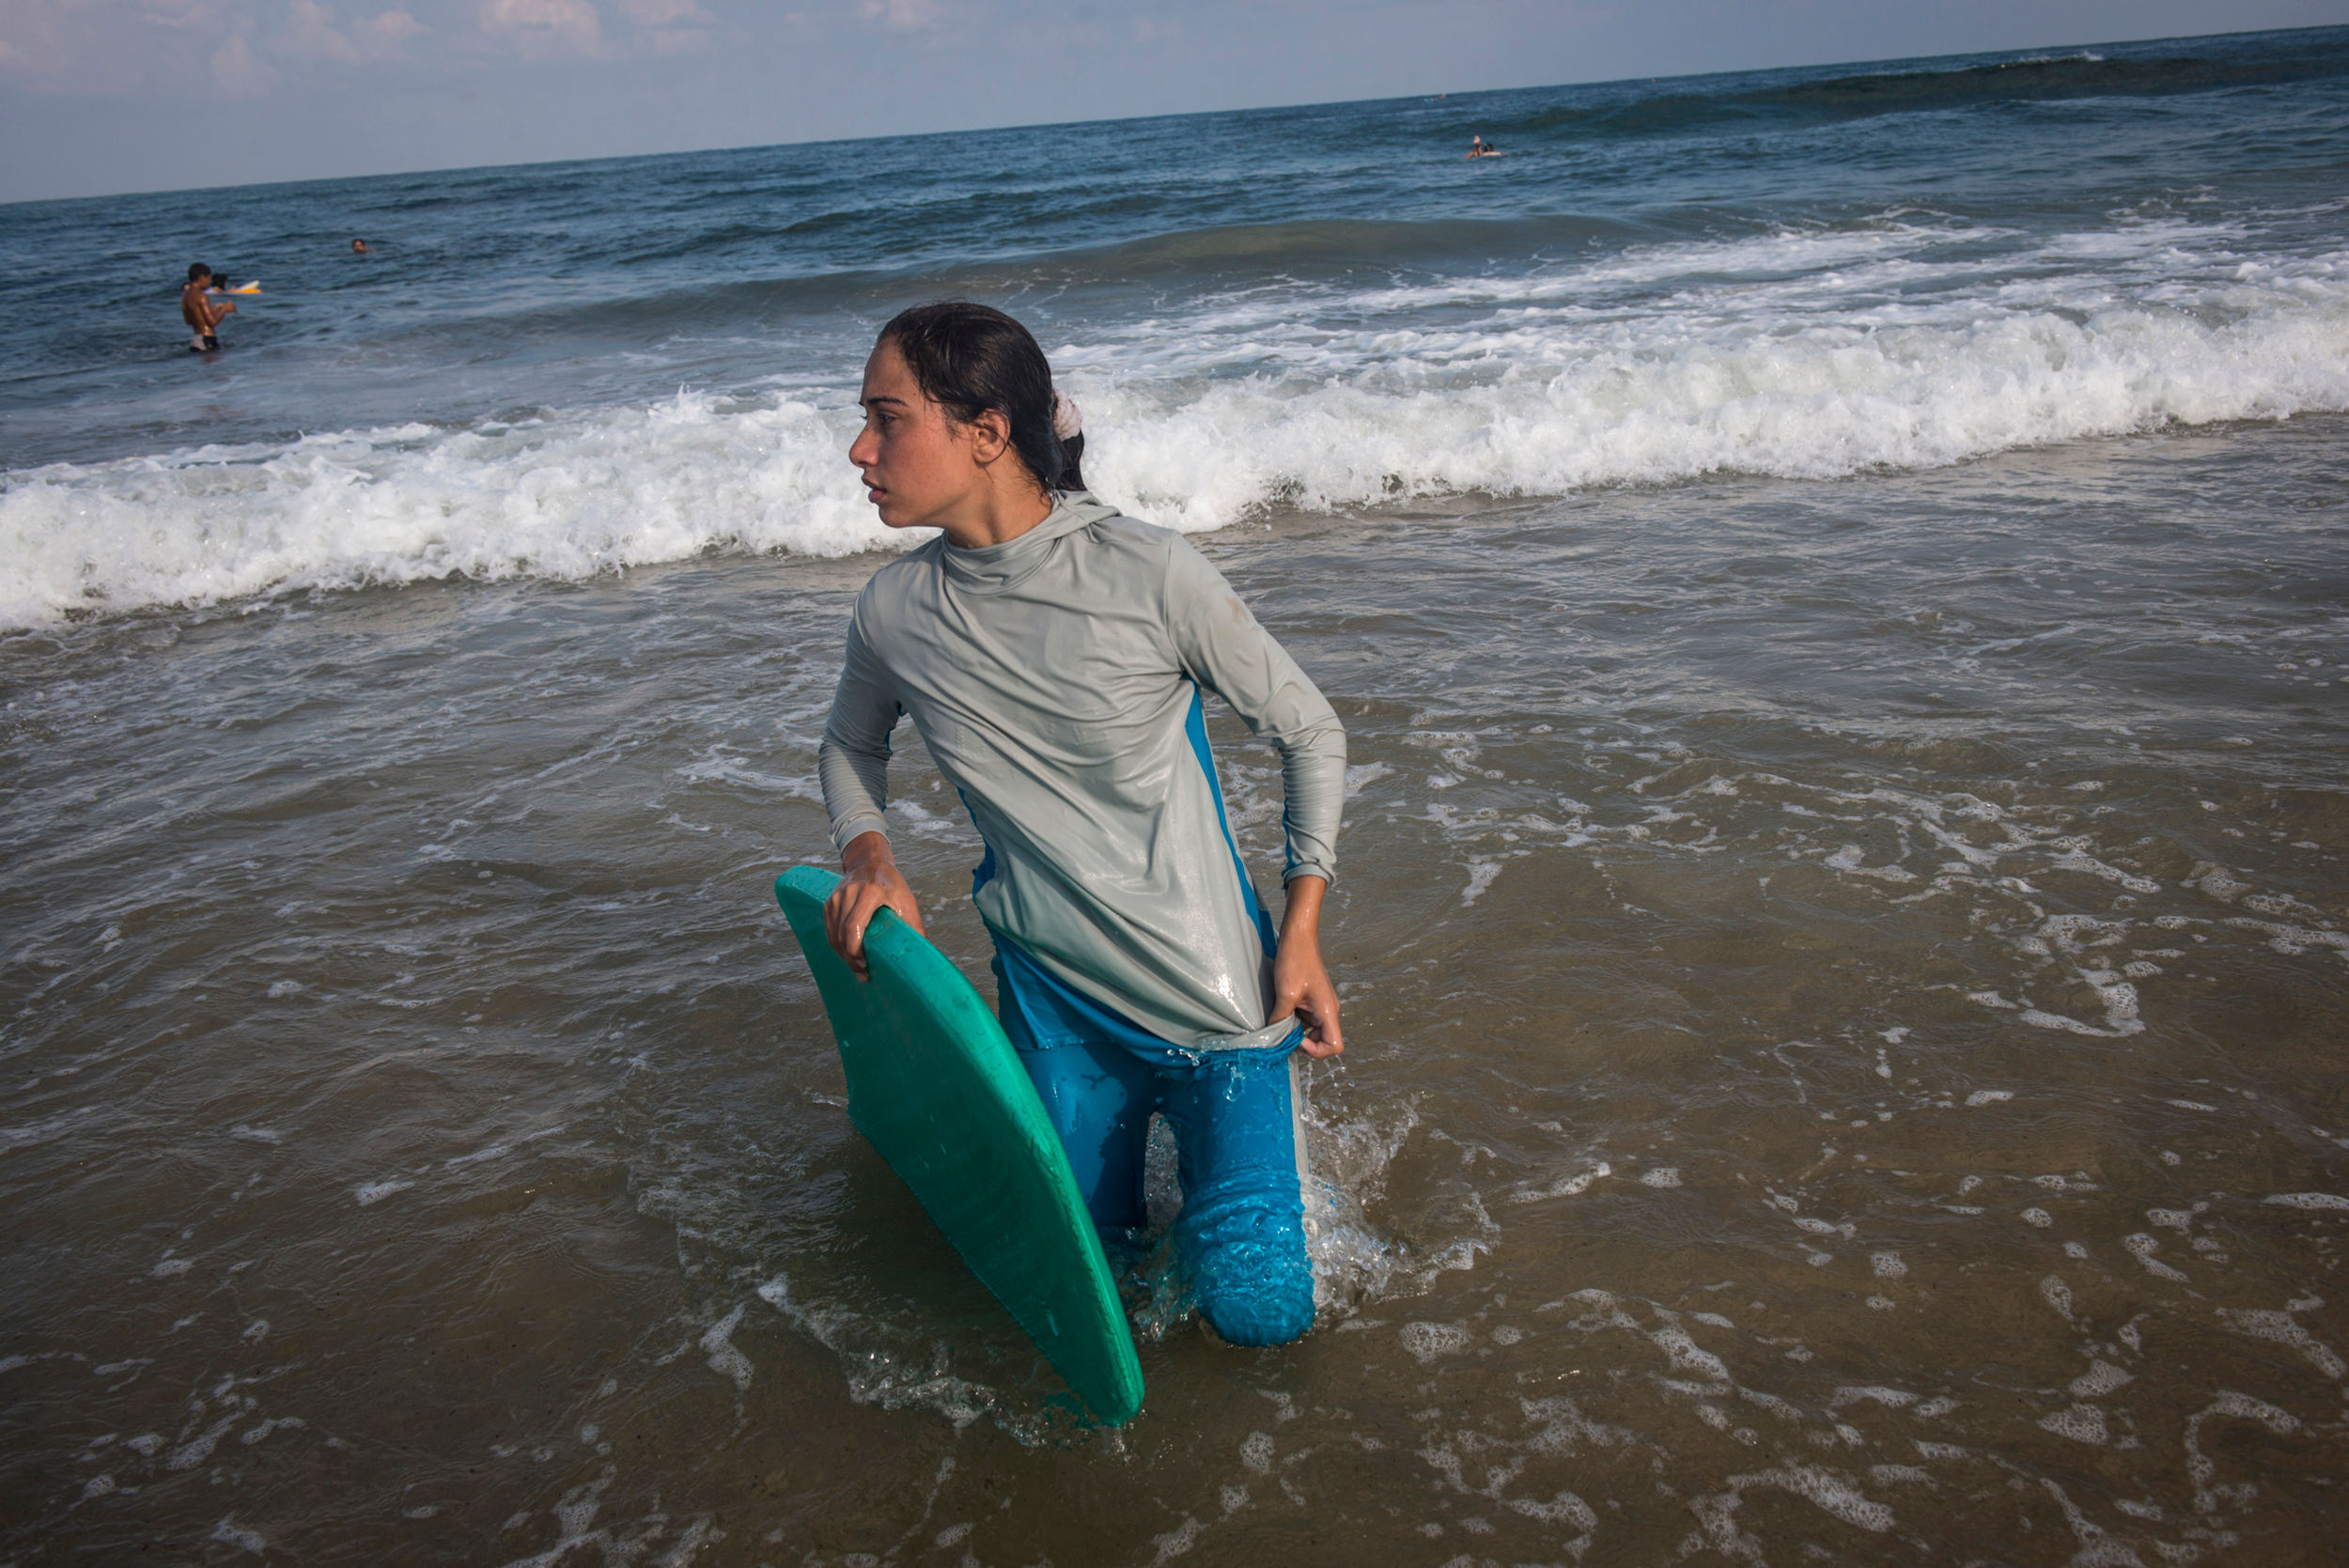  For many Gazans, the sea is the only place they can be without being reminded of their isolation. Female Surfer, Sabah Abu Ghanem,14, and her sister surf early in the morning outside of Gaza city. The sisters place first in many competitions inside 